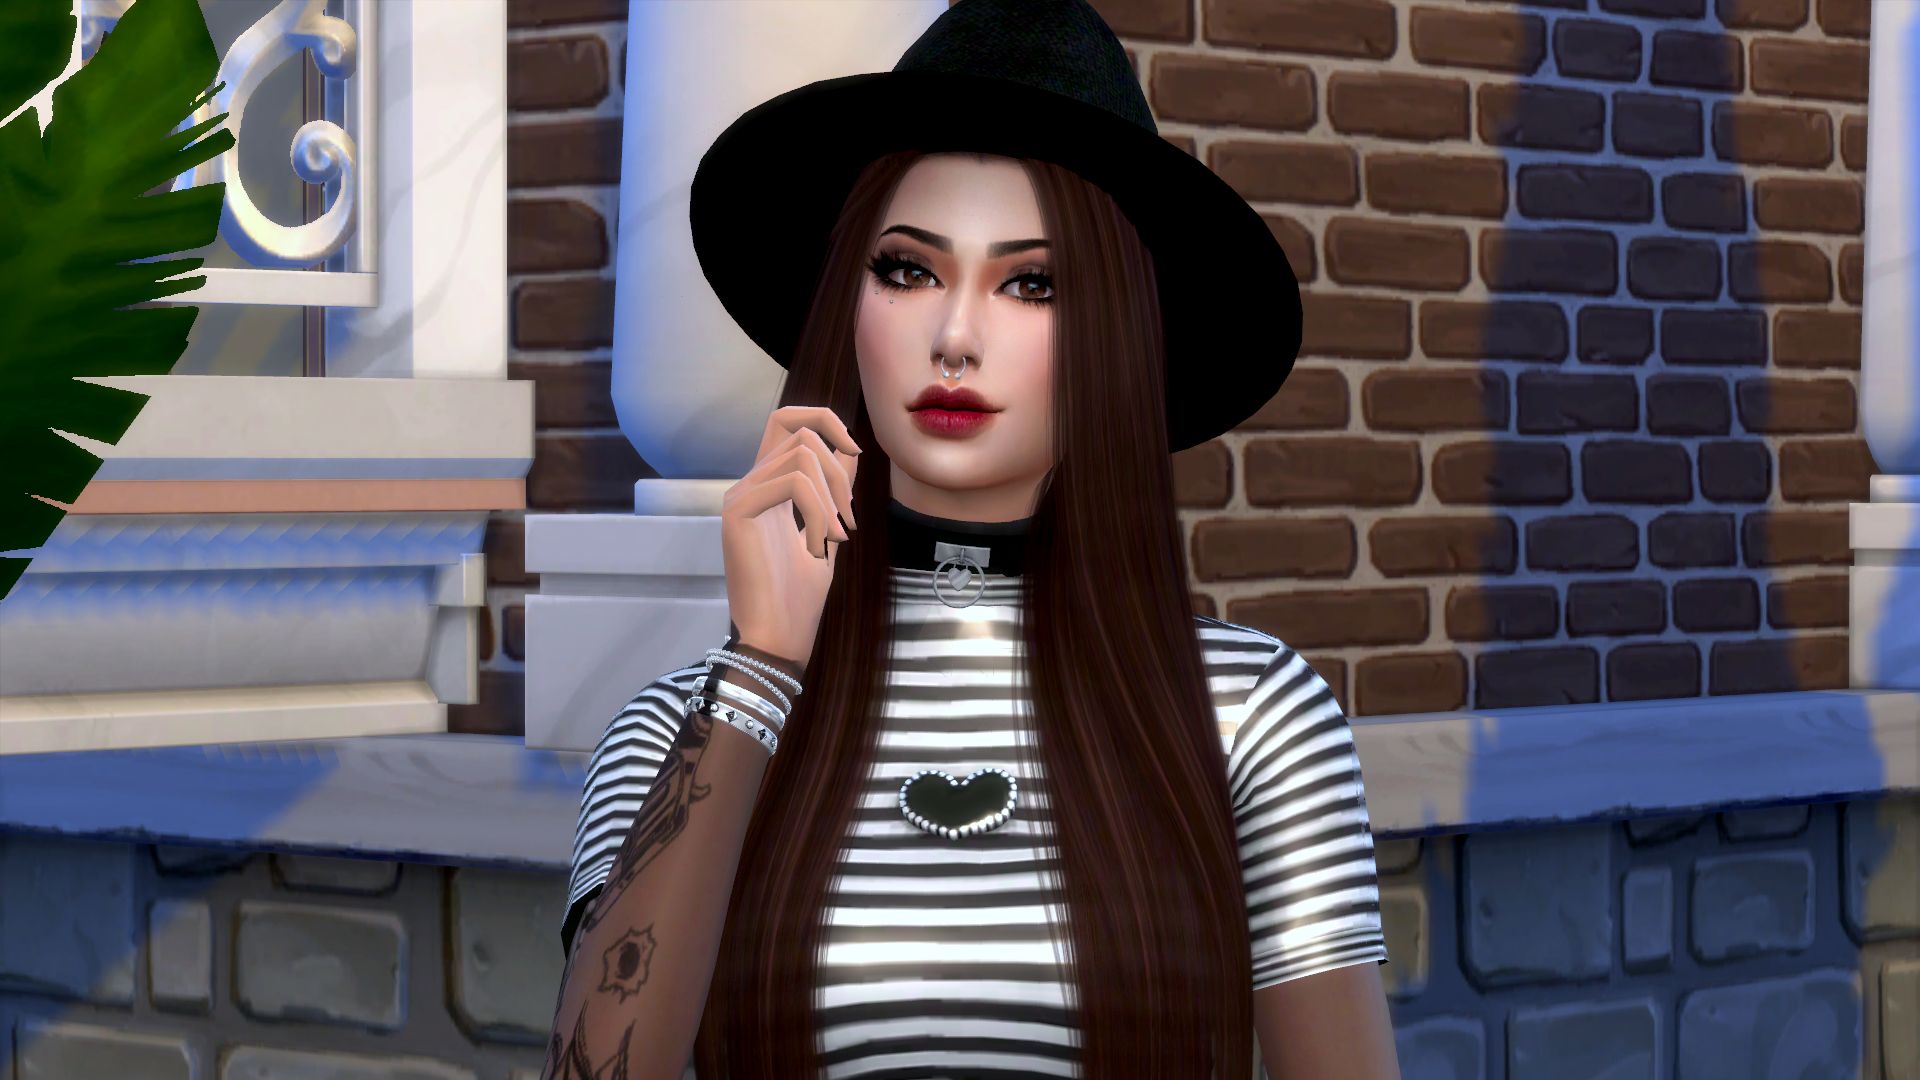 Share Your Female Sims Page 159 The Sims 4 General Discussion